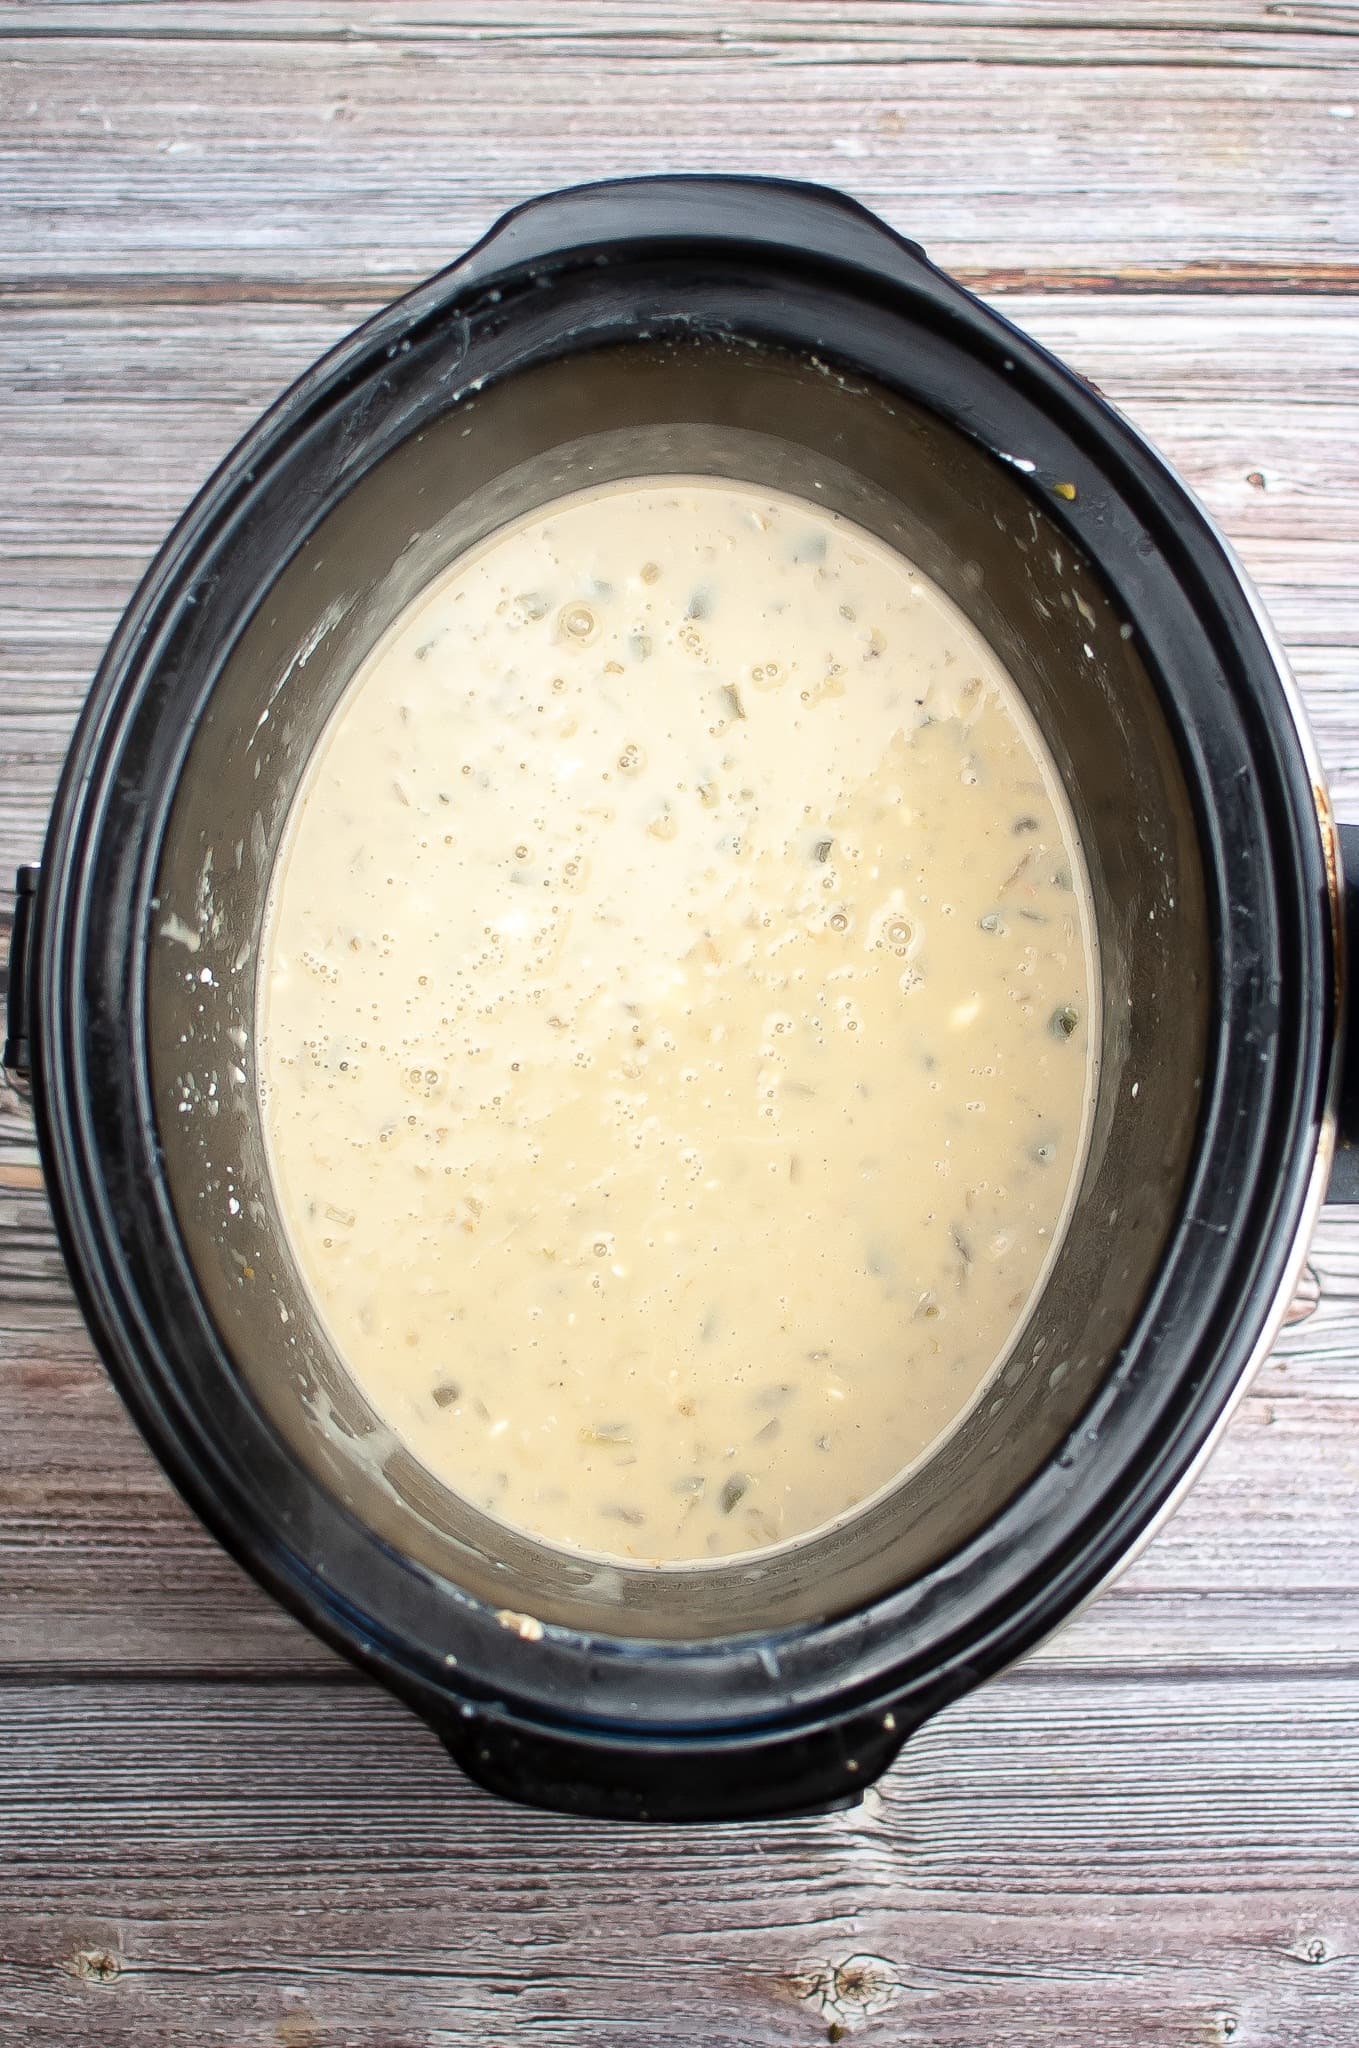 A crock pot with a white liquid inside to make slow cooker white chicken chili.